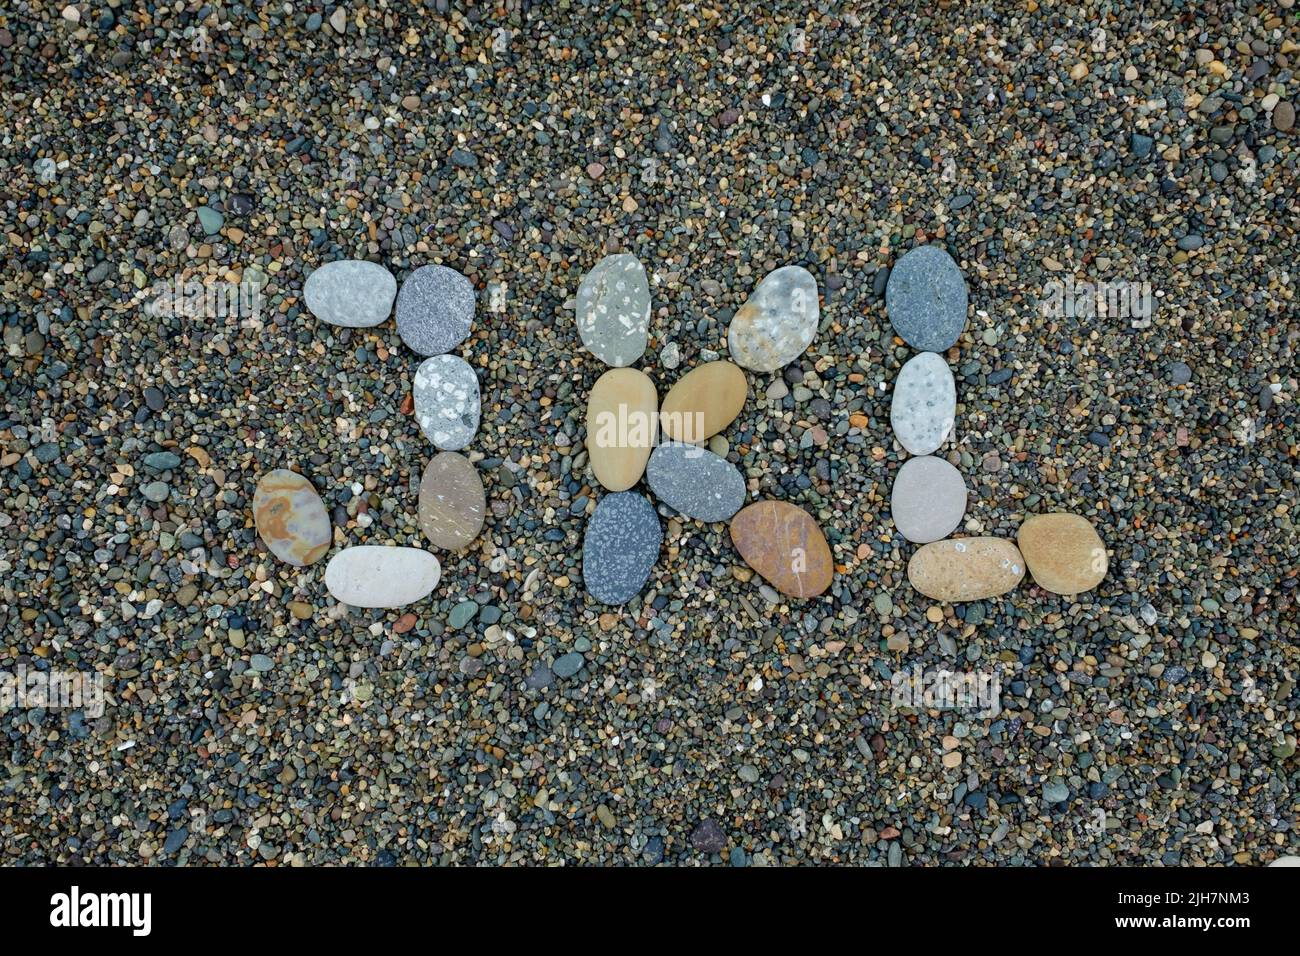 letters j k l made from stones in sand on beach Stock Photo